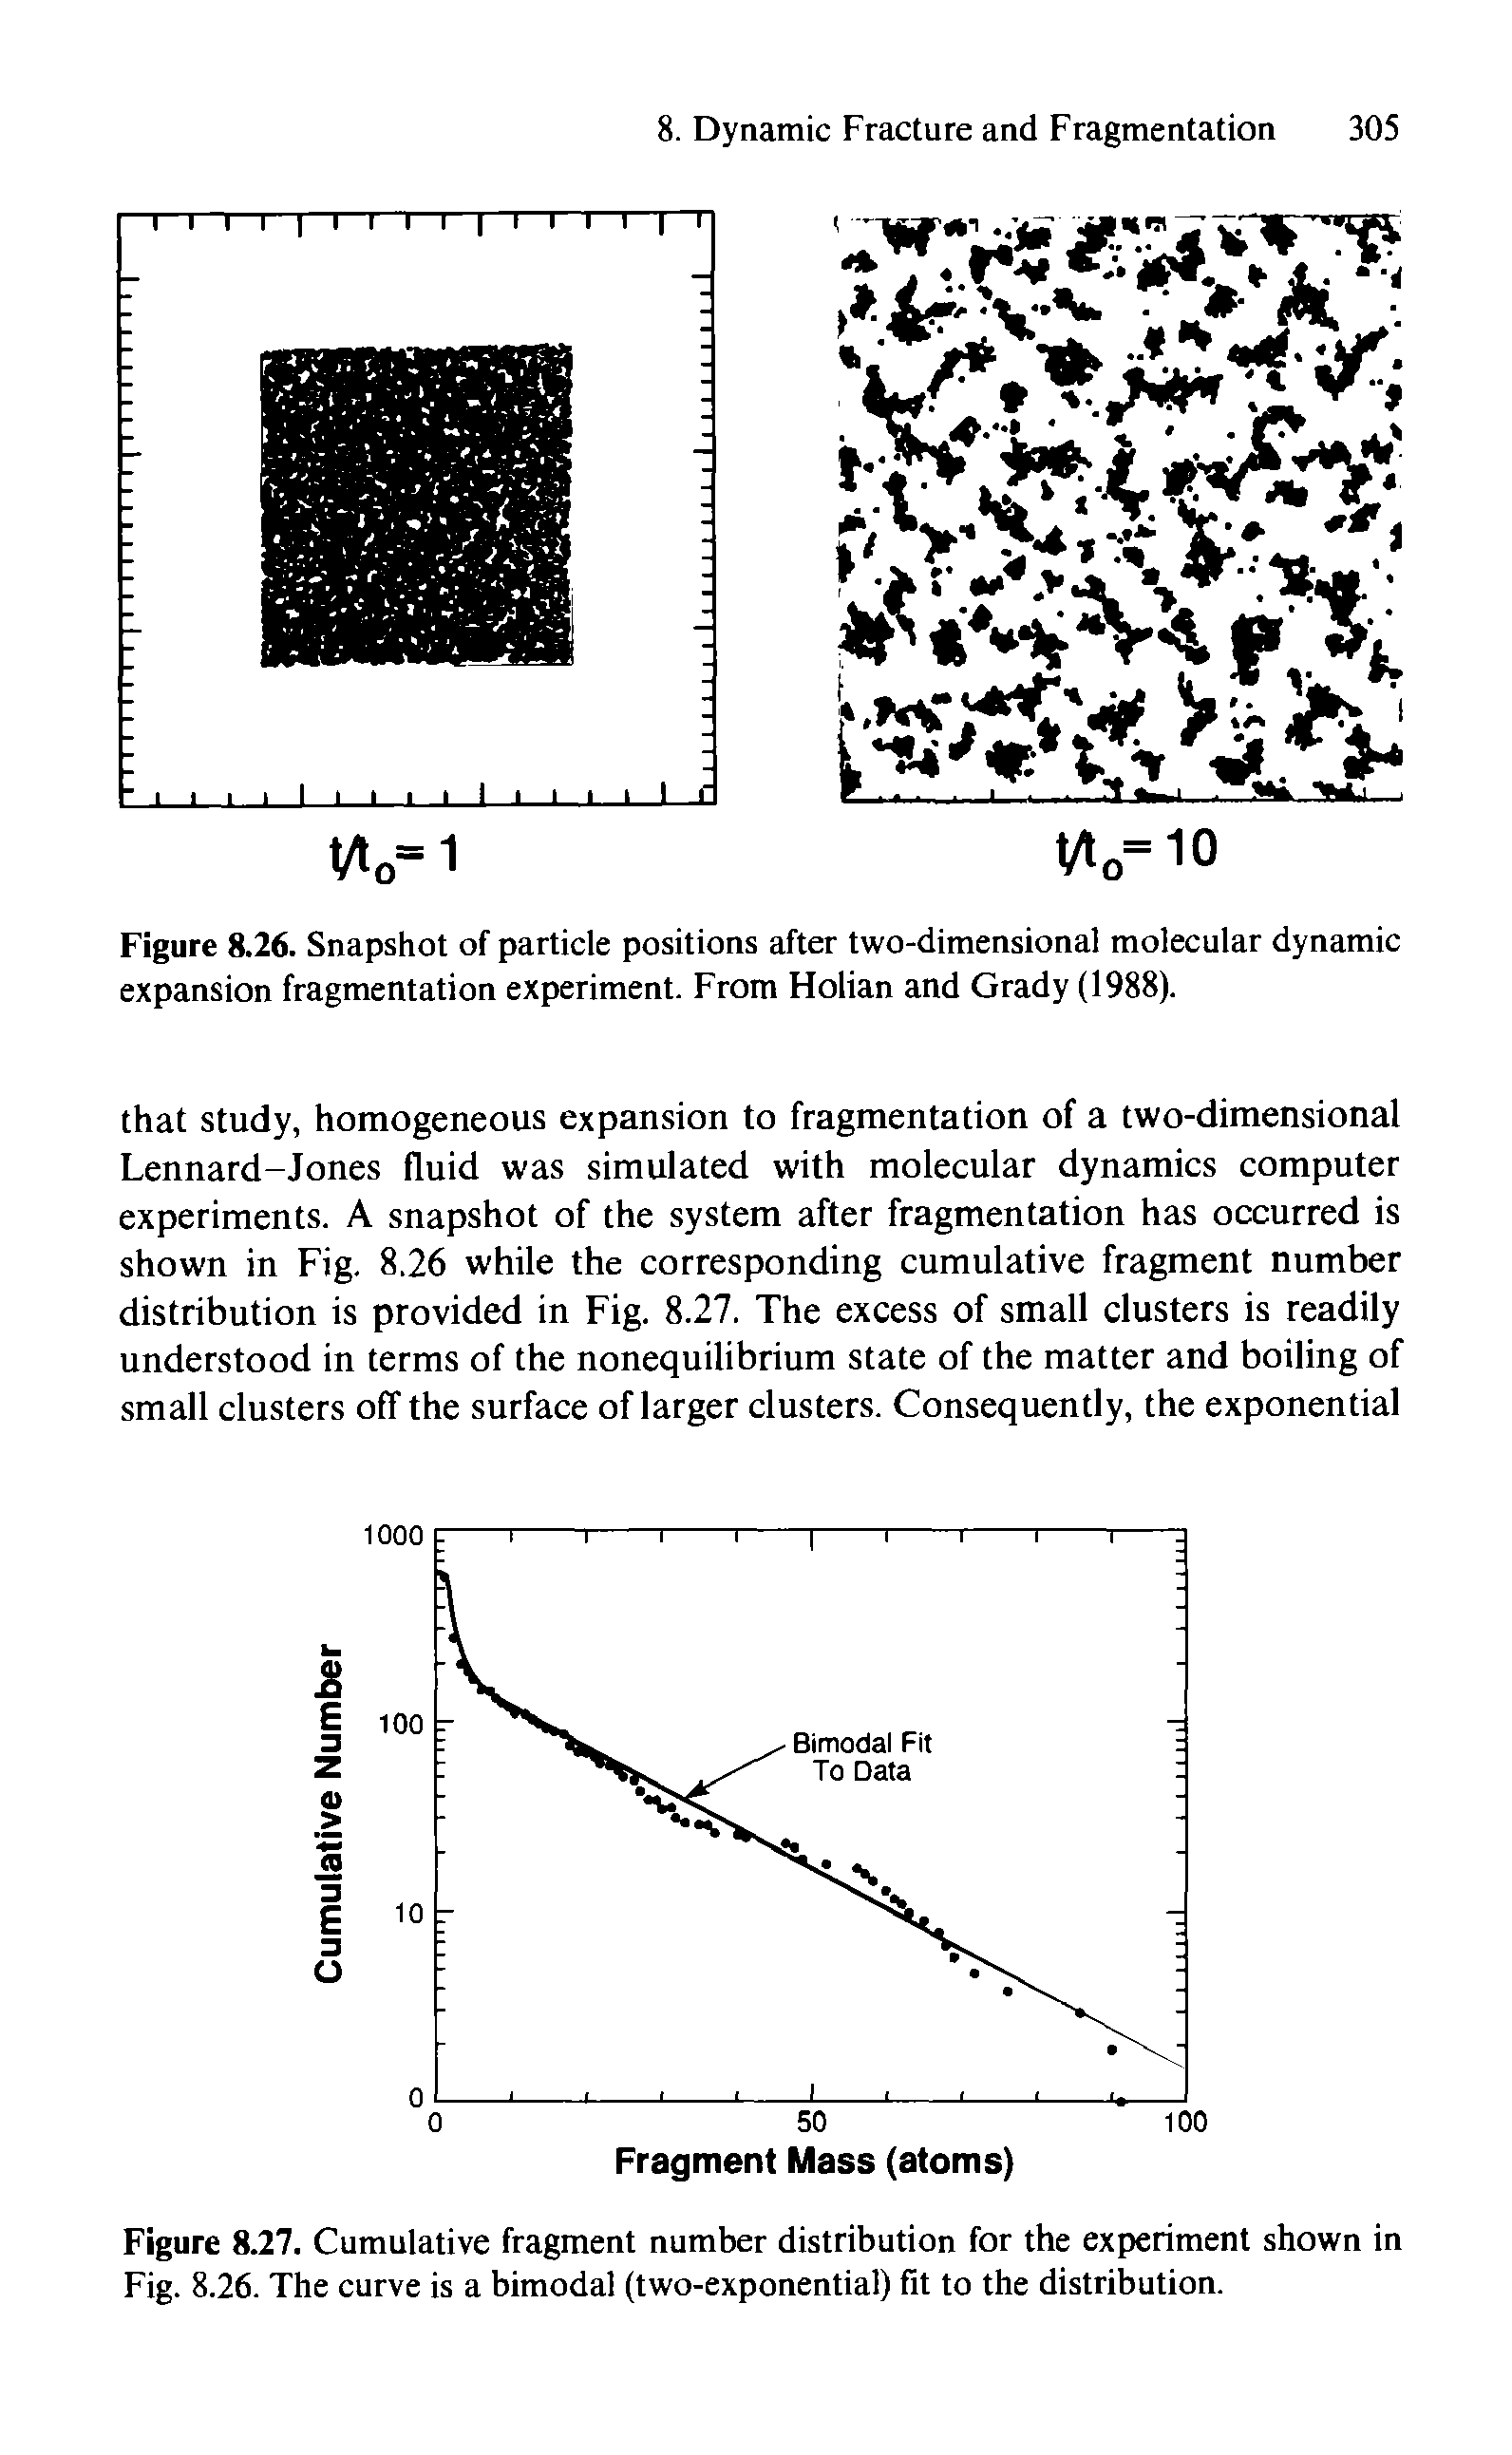 Figure 8.26. Snapshot of particle positions after two-dimensional molecular dynamic expansion fragmentation experiment. From Holian and Grady (1988).